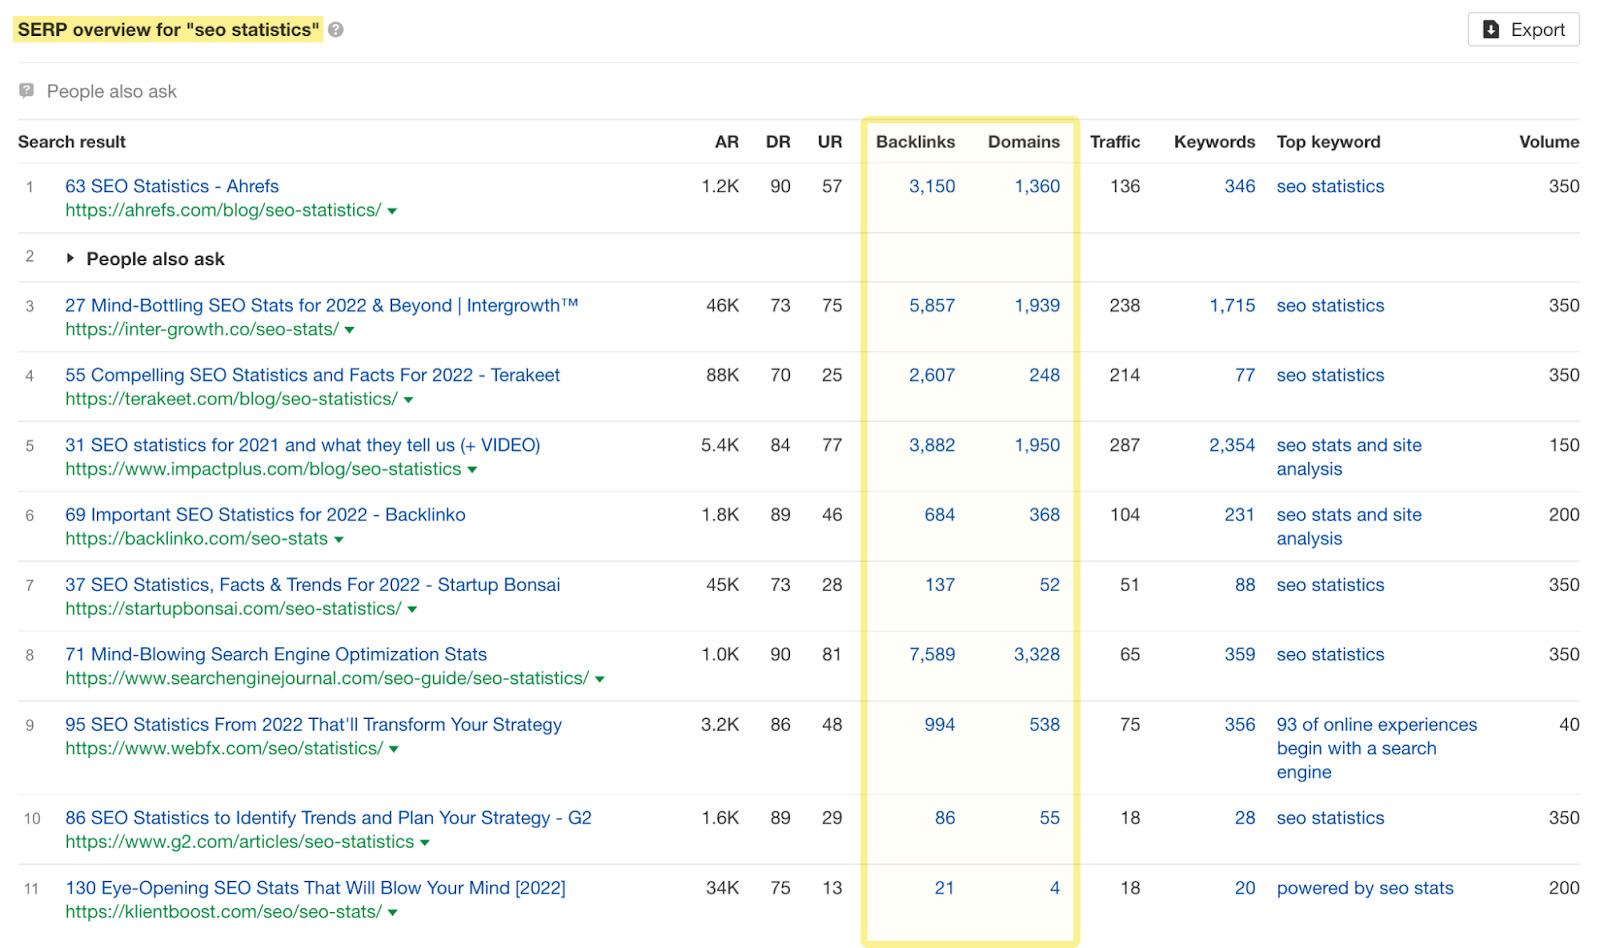 SERP overview for "seo statistics" 